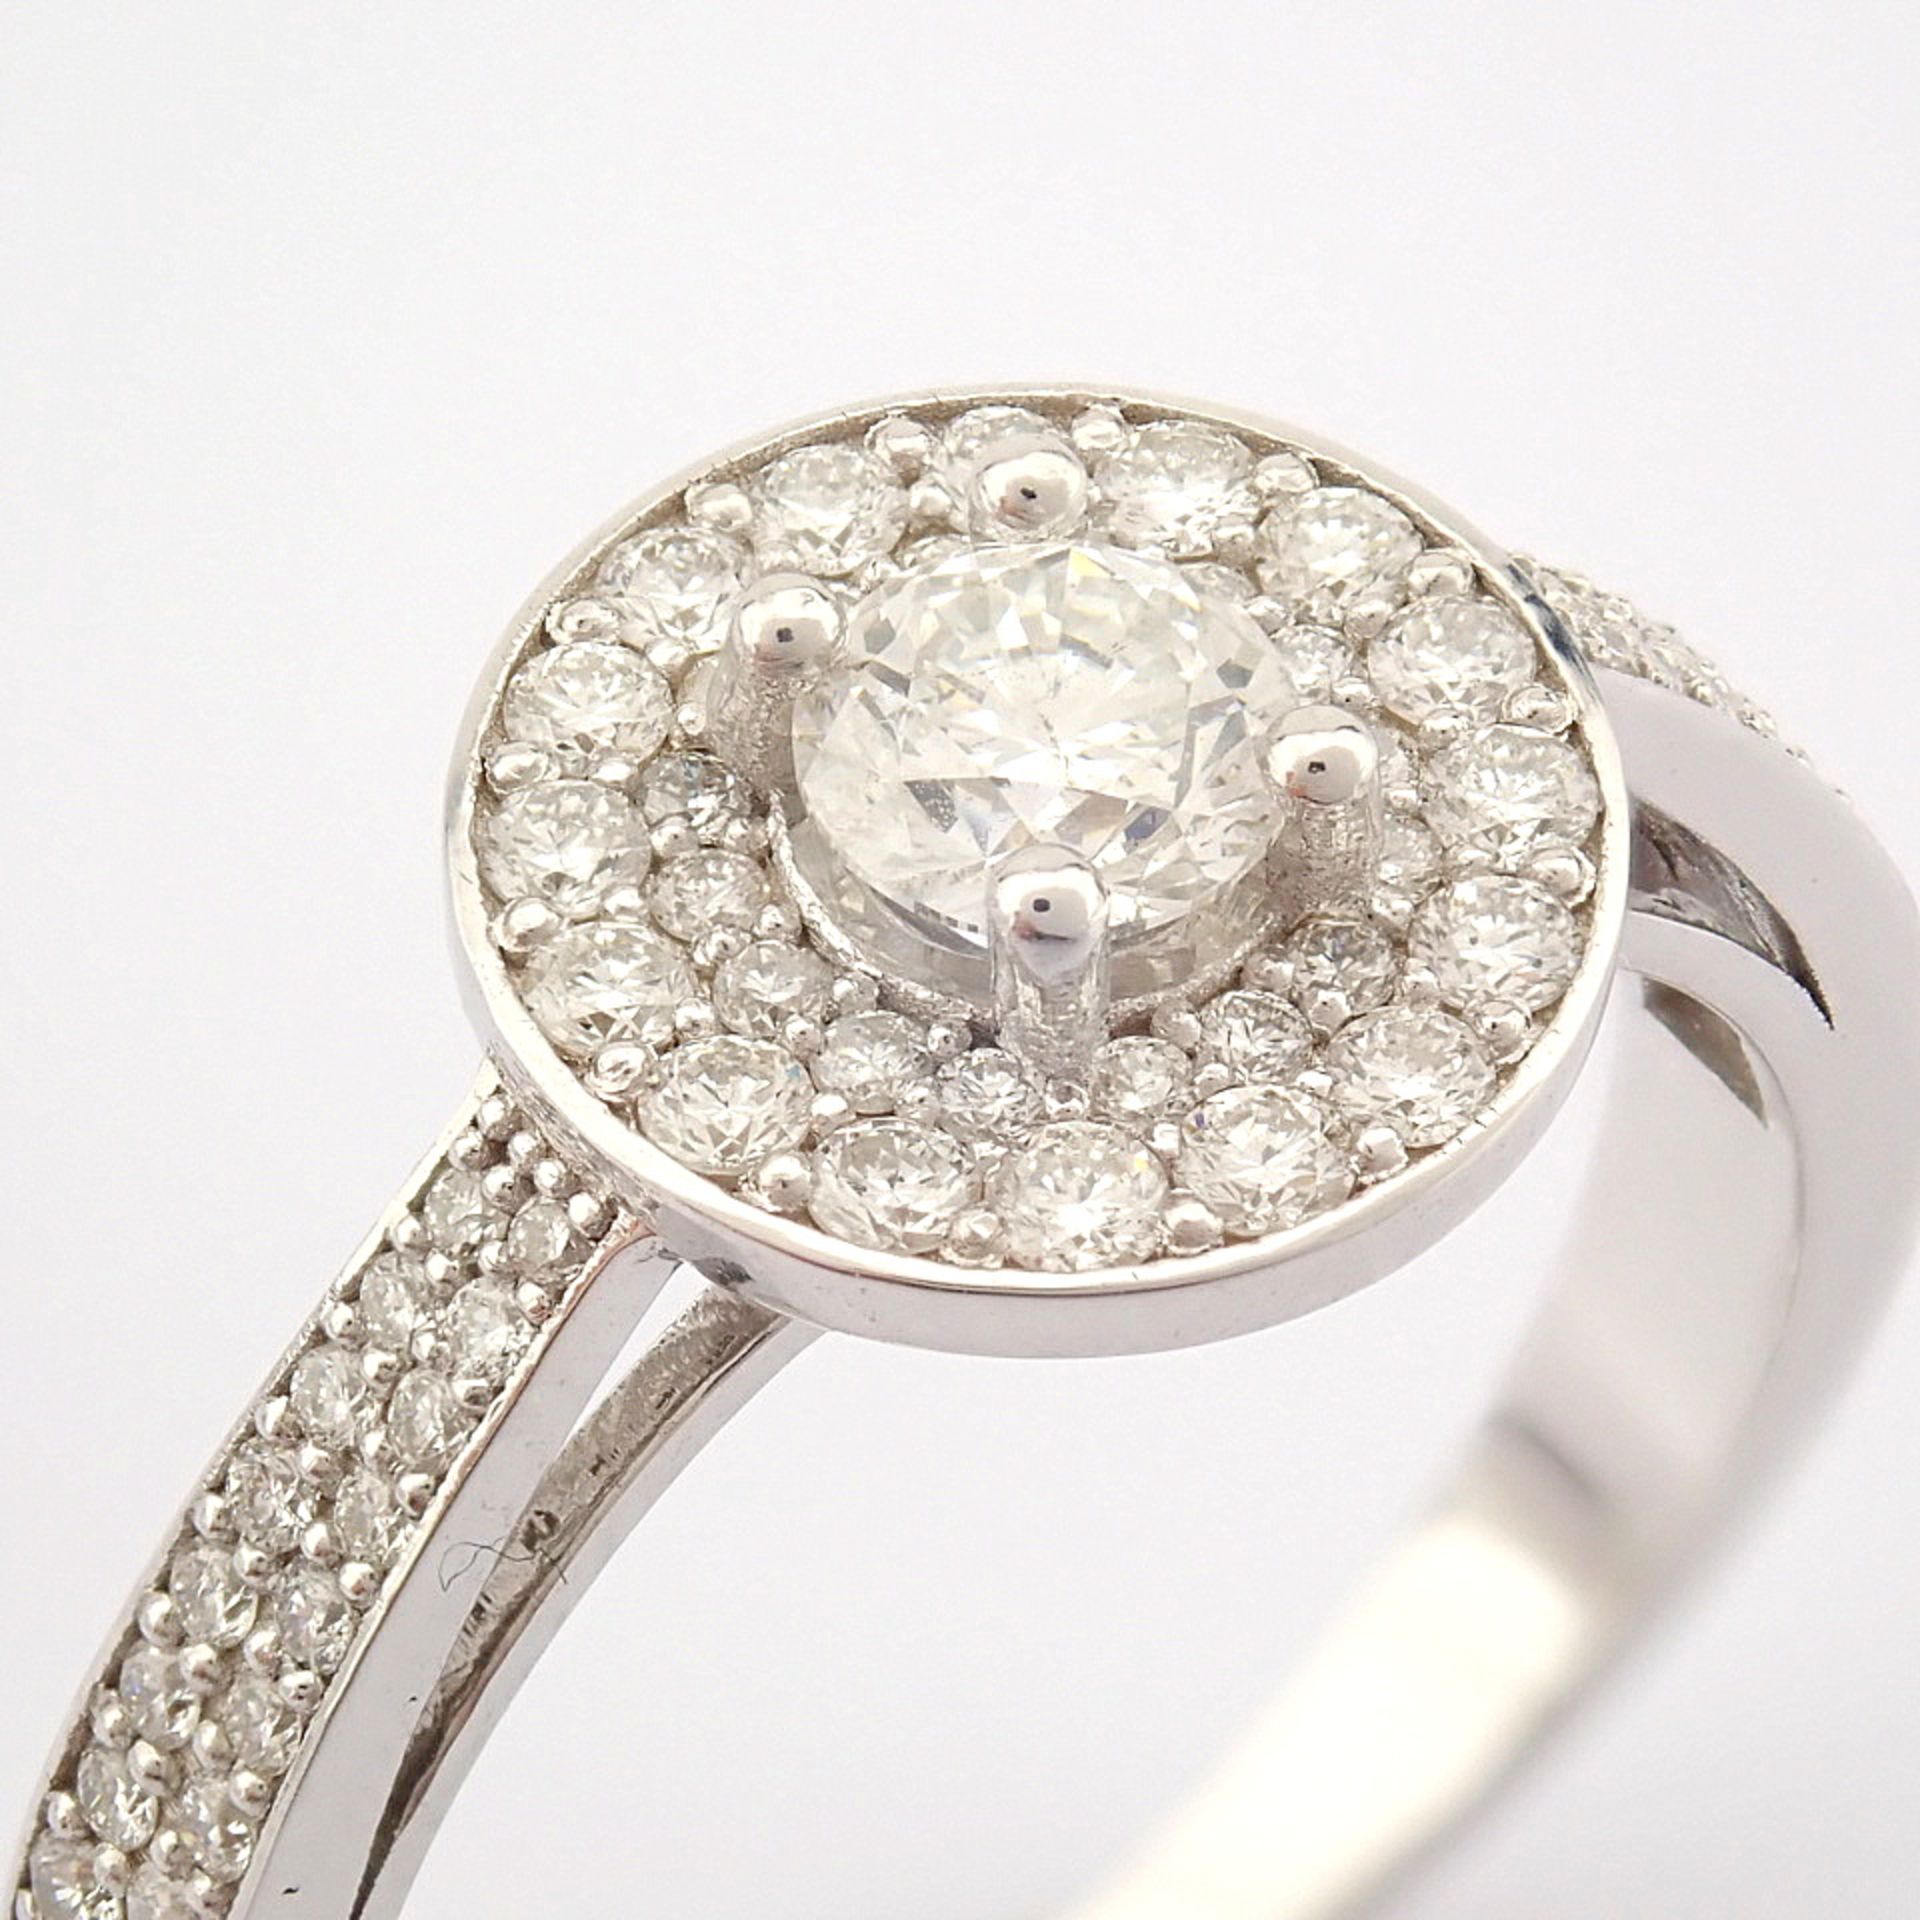 Certificated 18k White Gold Diamond Ring (Total 0.75 ct Stone) - Image 5 of 16